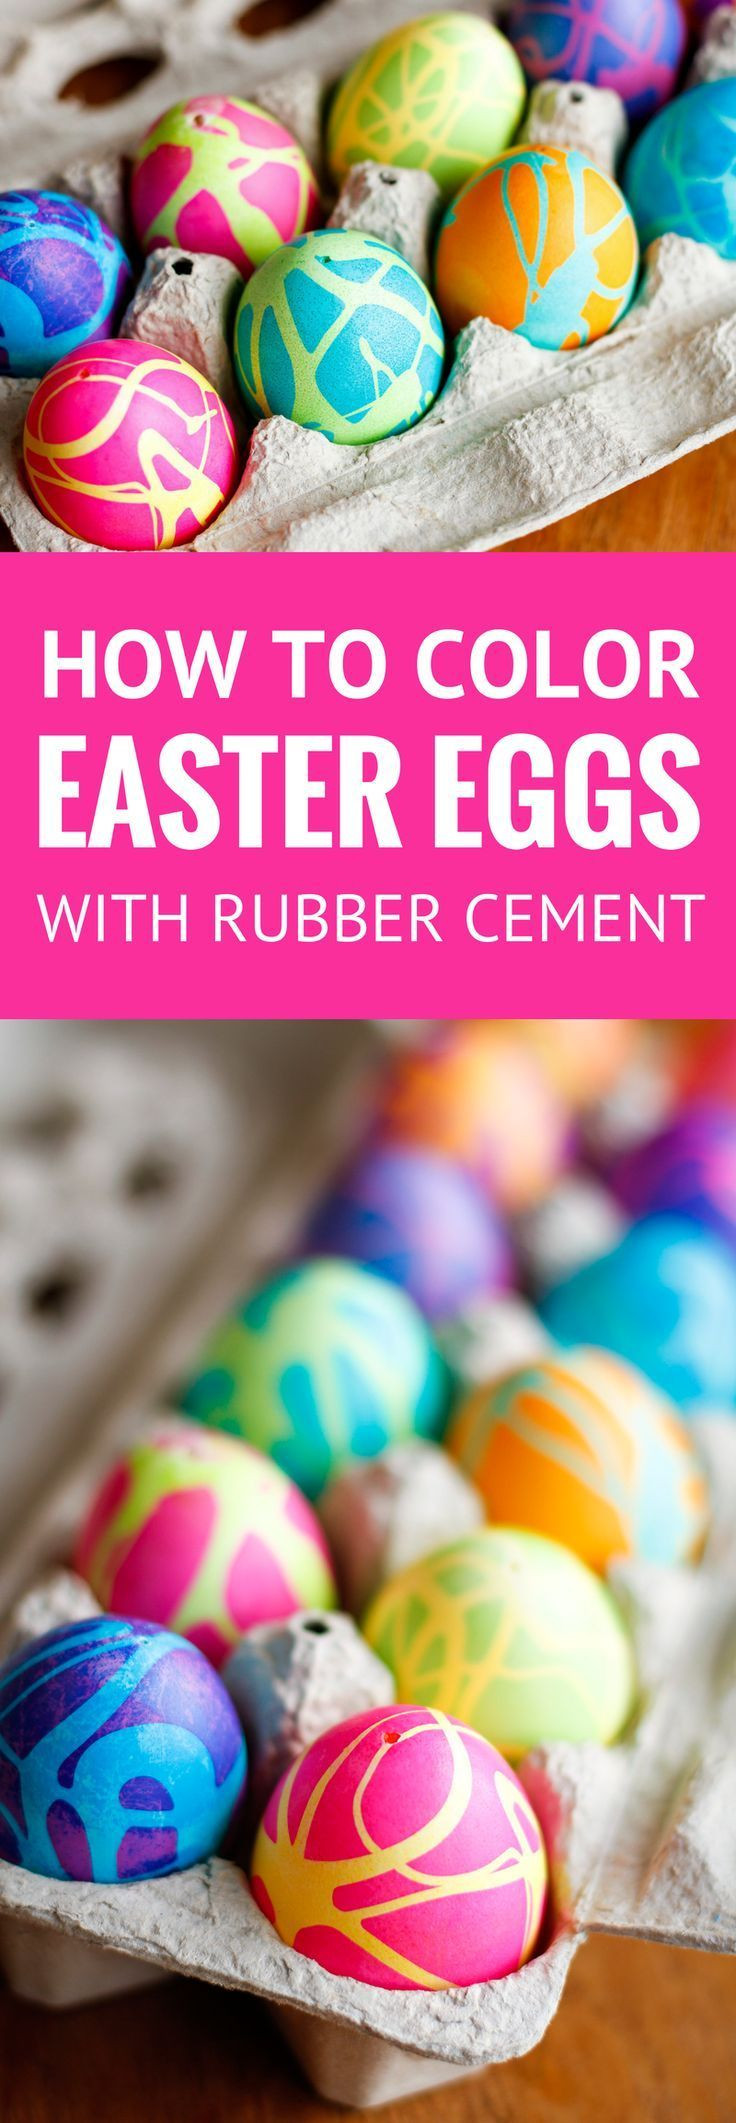 Easter Eggs With Food Coloring
 Coloring Easter Eggs w Rubber Cement dyeing Easter